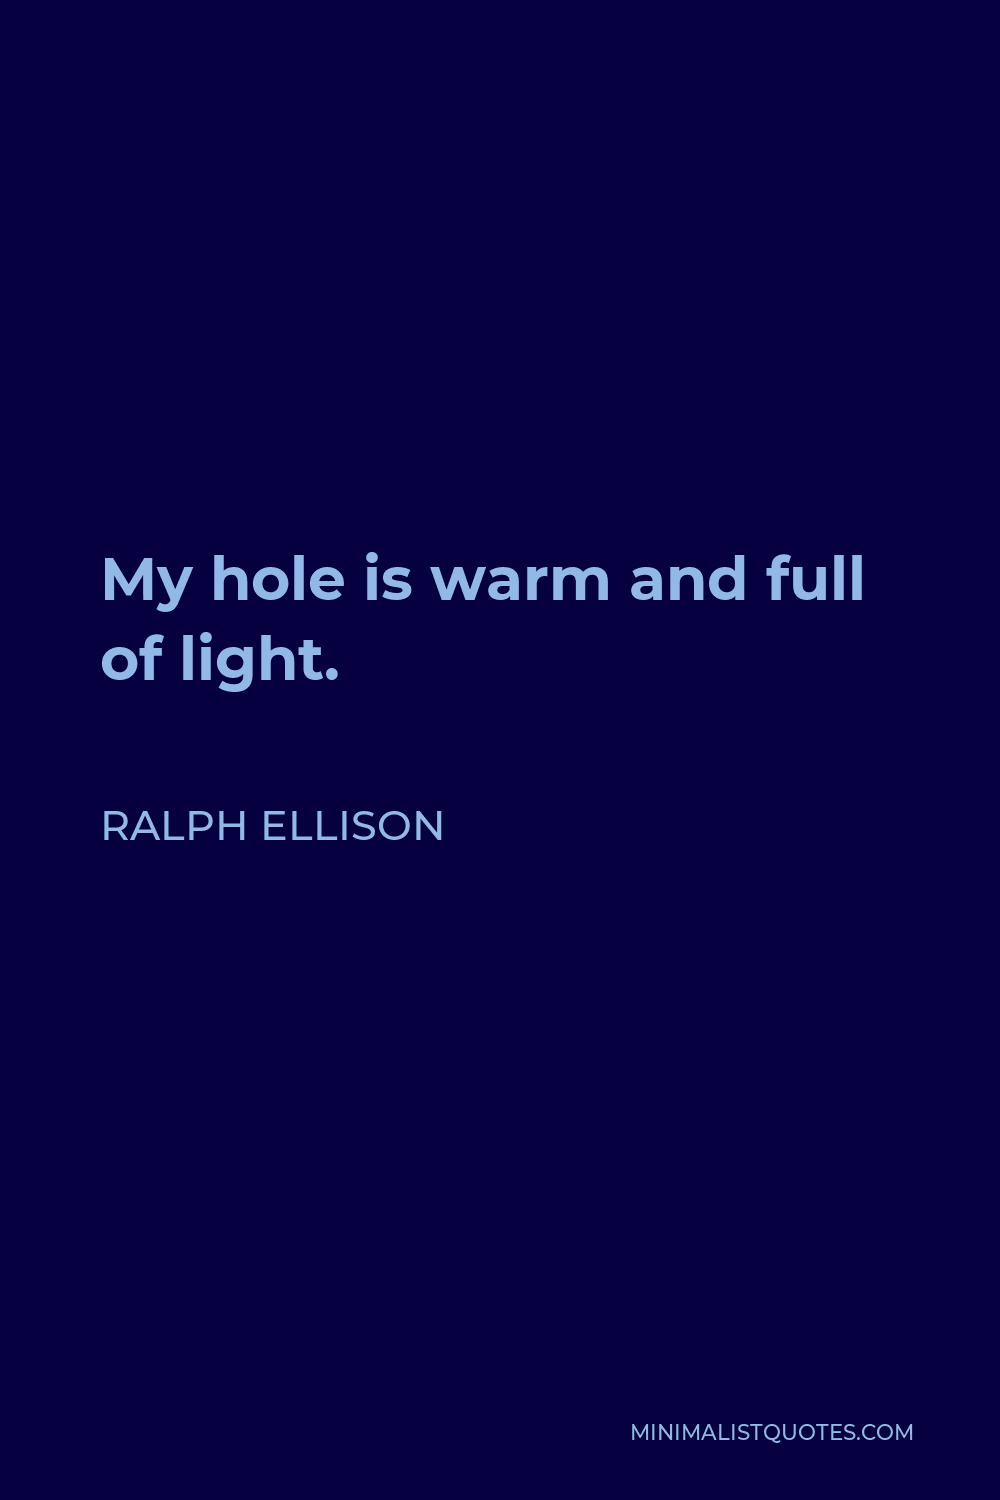 Ralph Ellison Quote - My hole is warm and full of light.